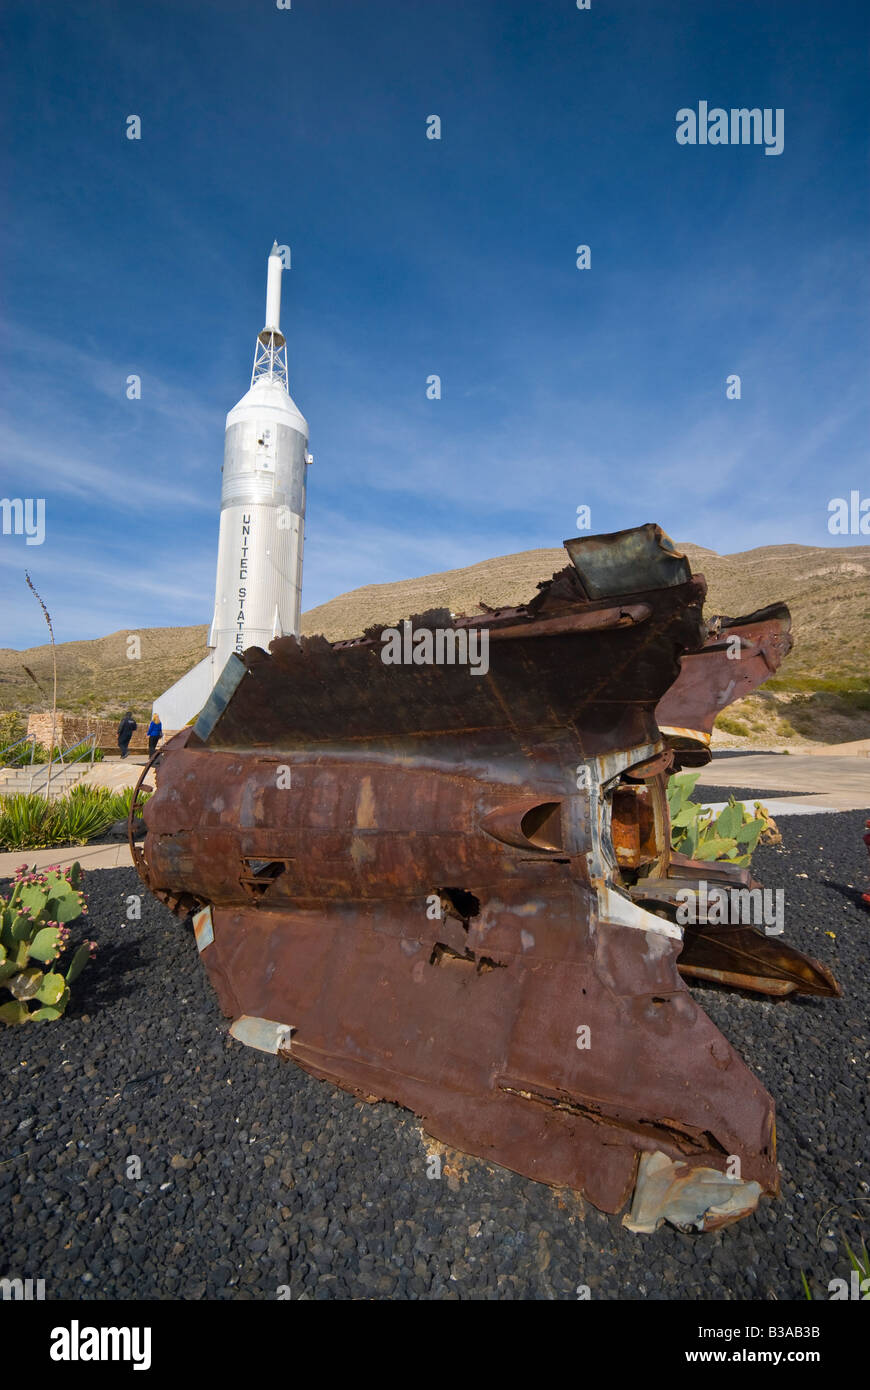 USA, New Mexico, Alamogordo, Museum of Space History, Remains of V2 rocket & Little Joe II solid-fueled rocket Stock Photo